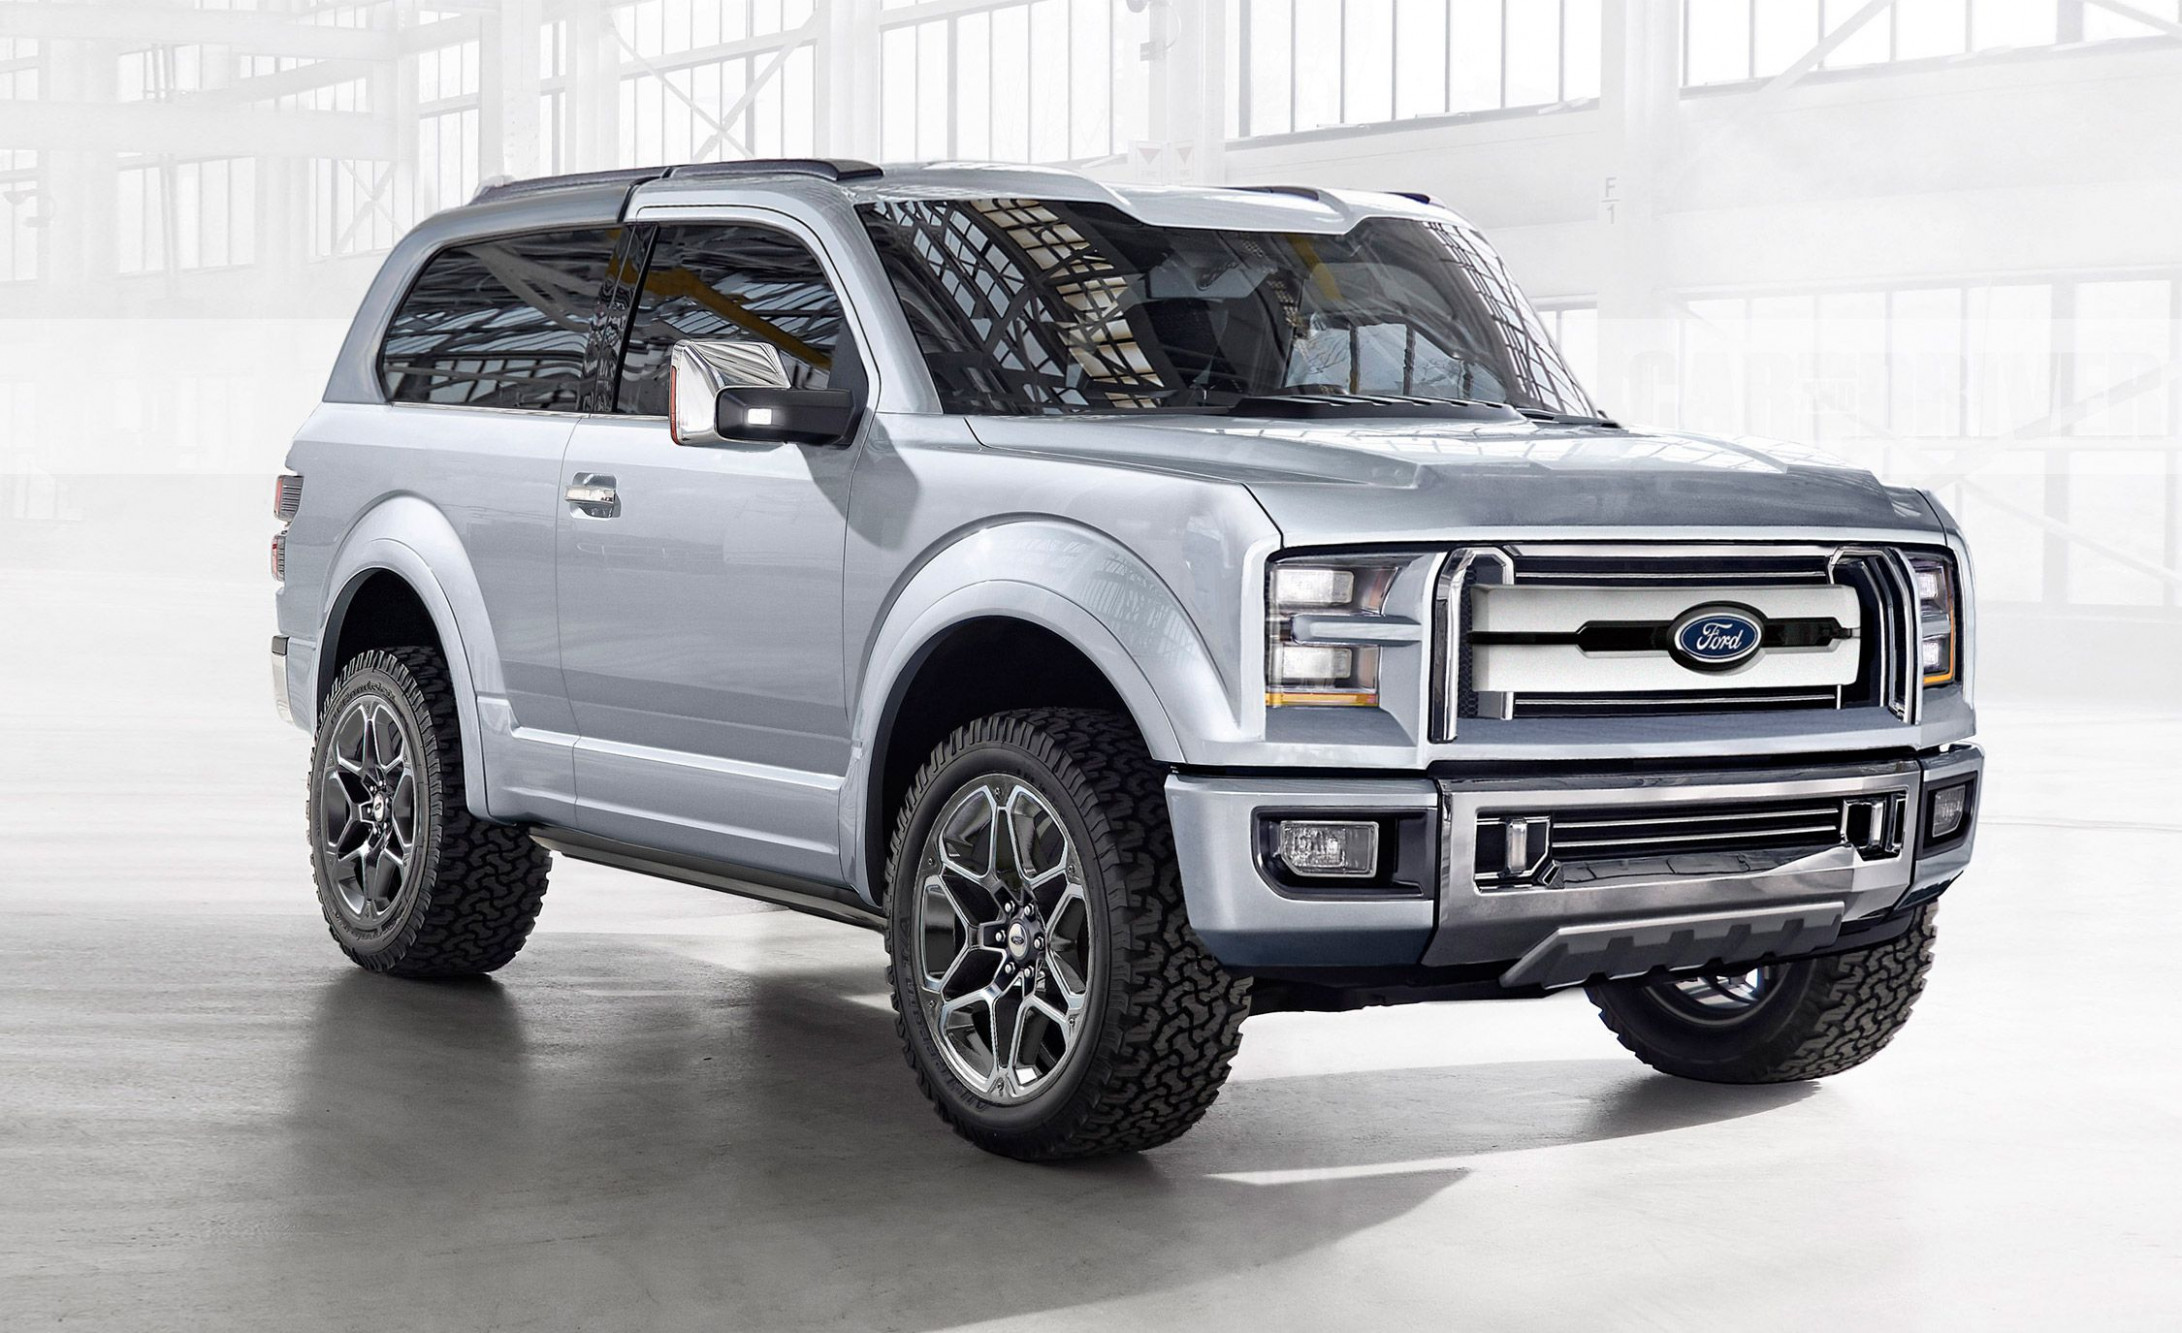 Rumors 2022 Ford Bronco - Cars Review : Cars Review